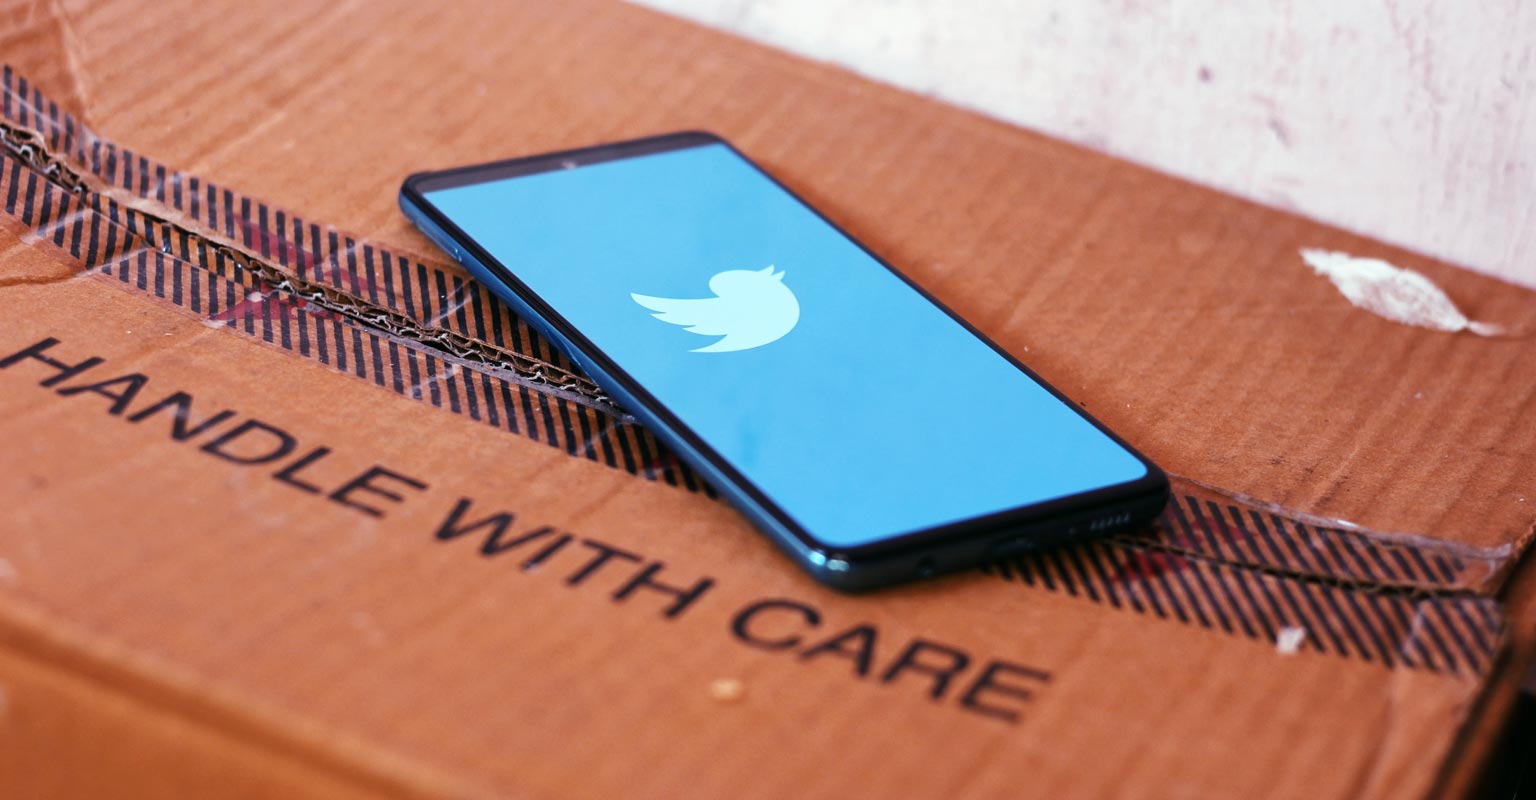 Twitter may introduce Subscription fee for its service